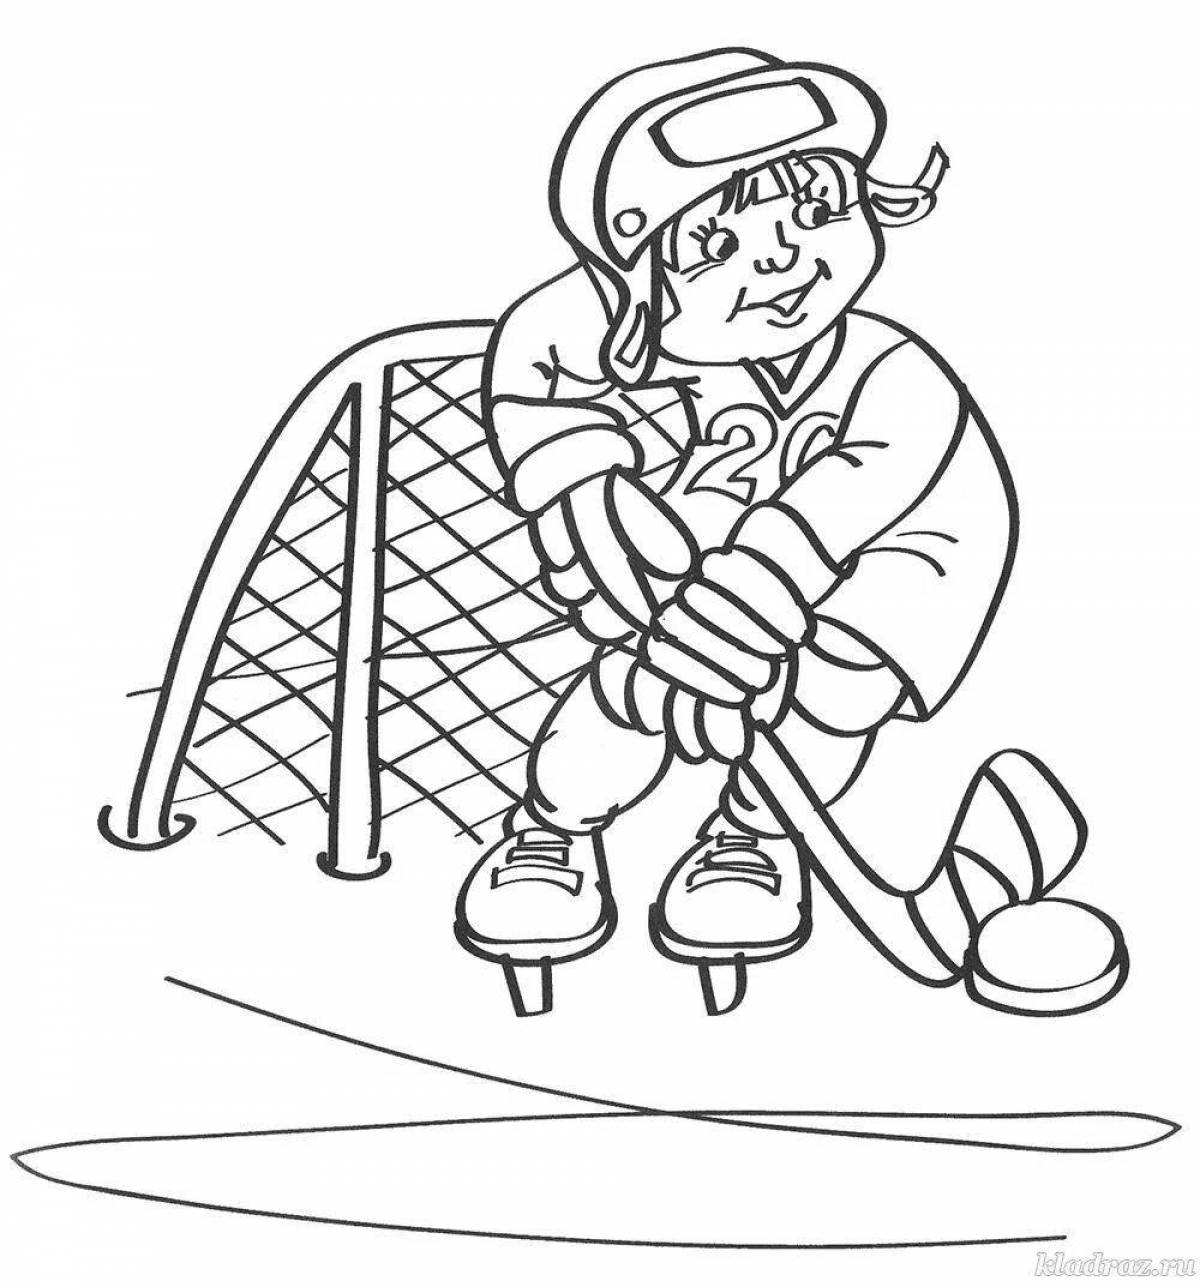 Great winter sports coloring book for kindergarten